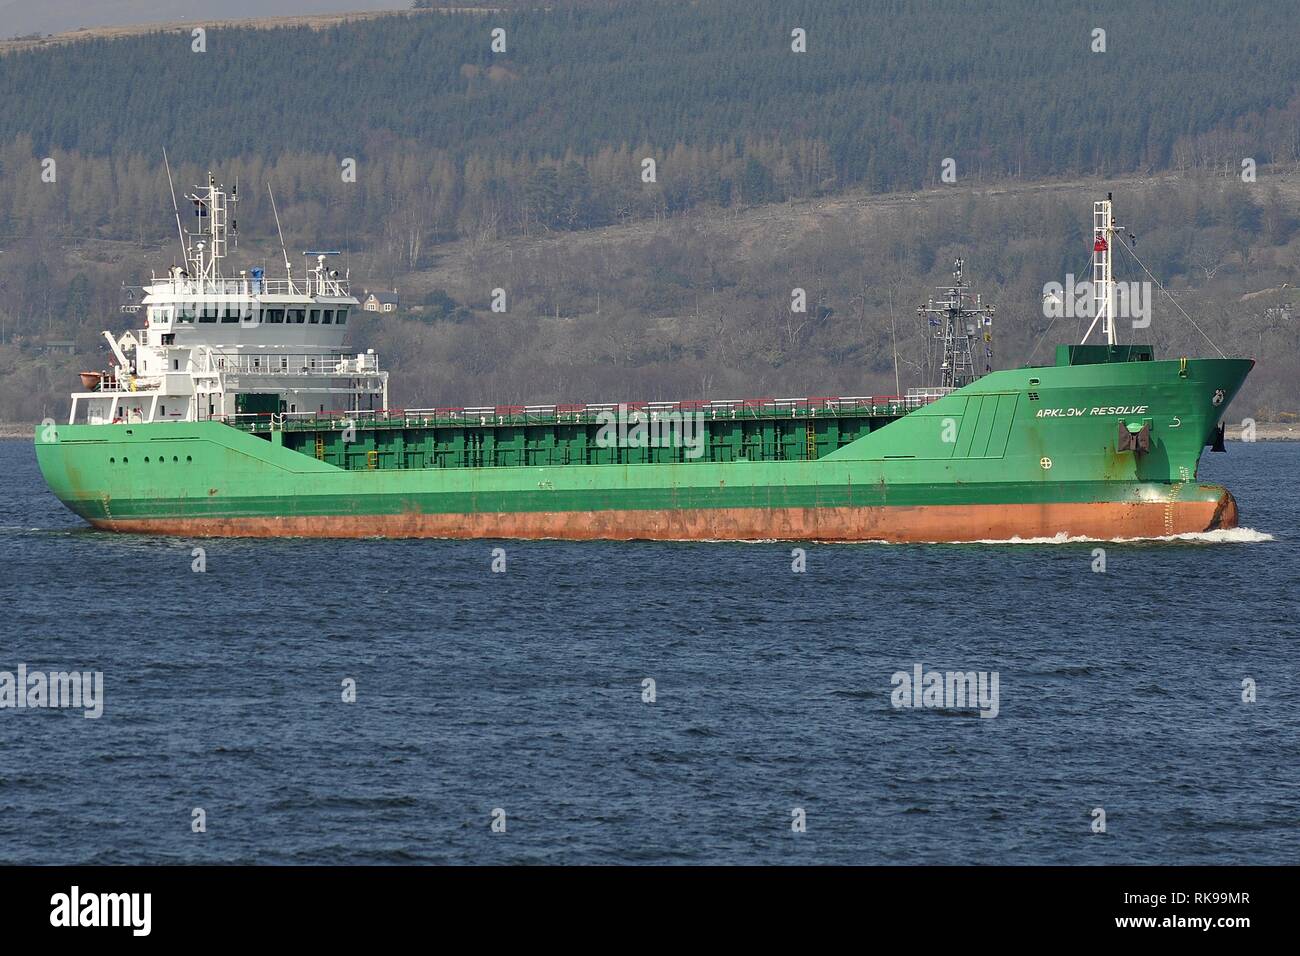 ARKLOW RESOLVE OF ARKLOW SHIPPING COMPANY, INVOLVED IN SEABORNE FREIGHT COMPANY IN BREXIT PLANS BY SECRETARY OF STATE CHRIS GRAYLING. Stock Photo